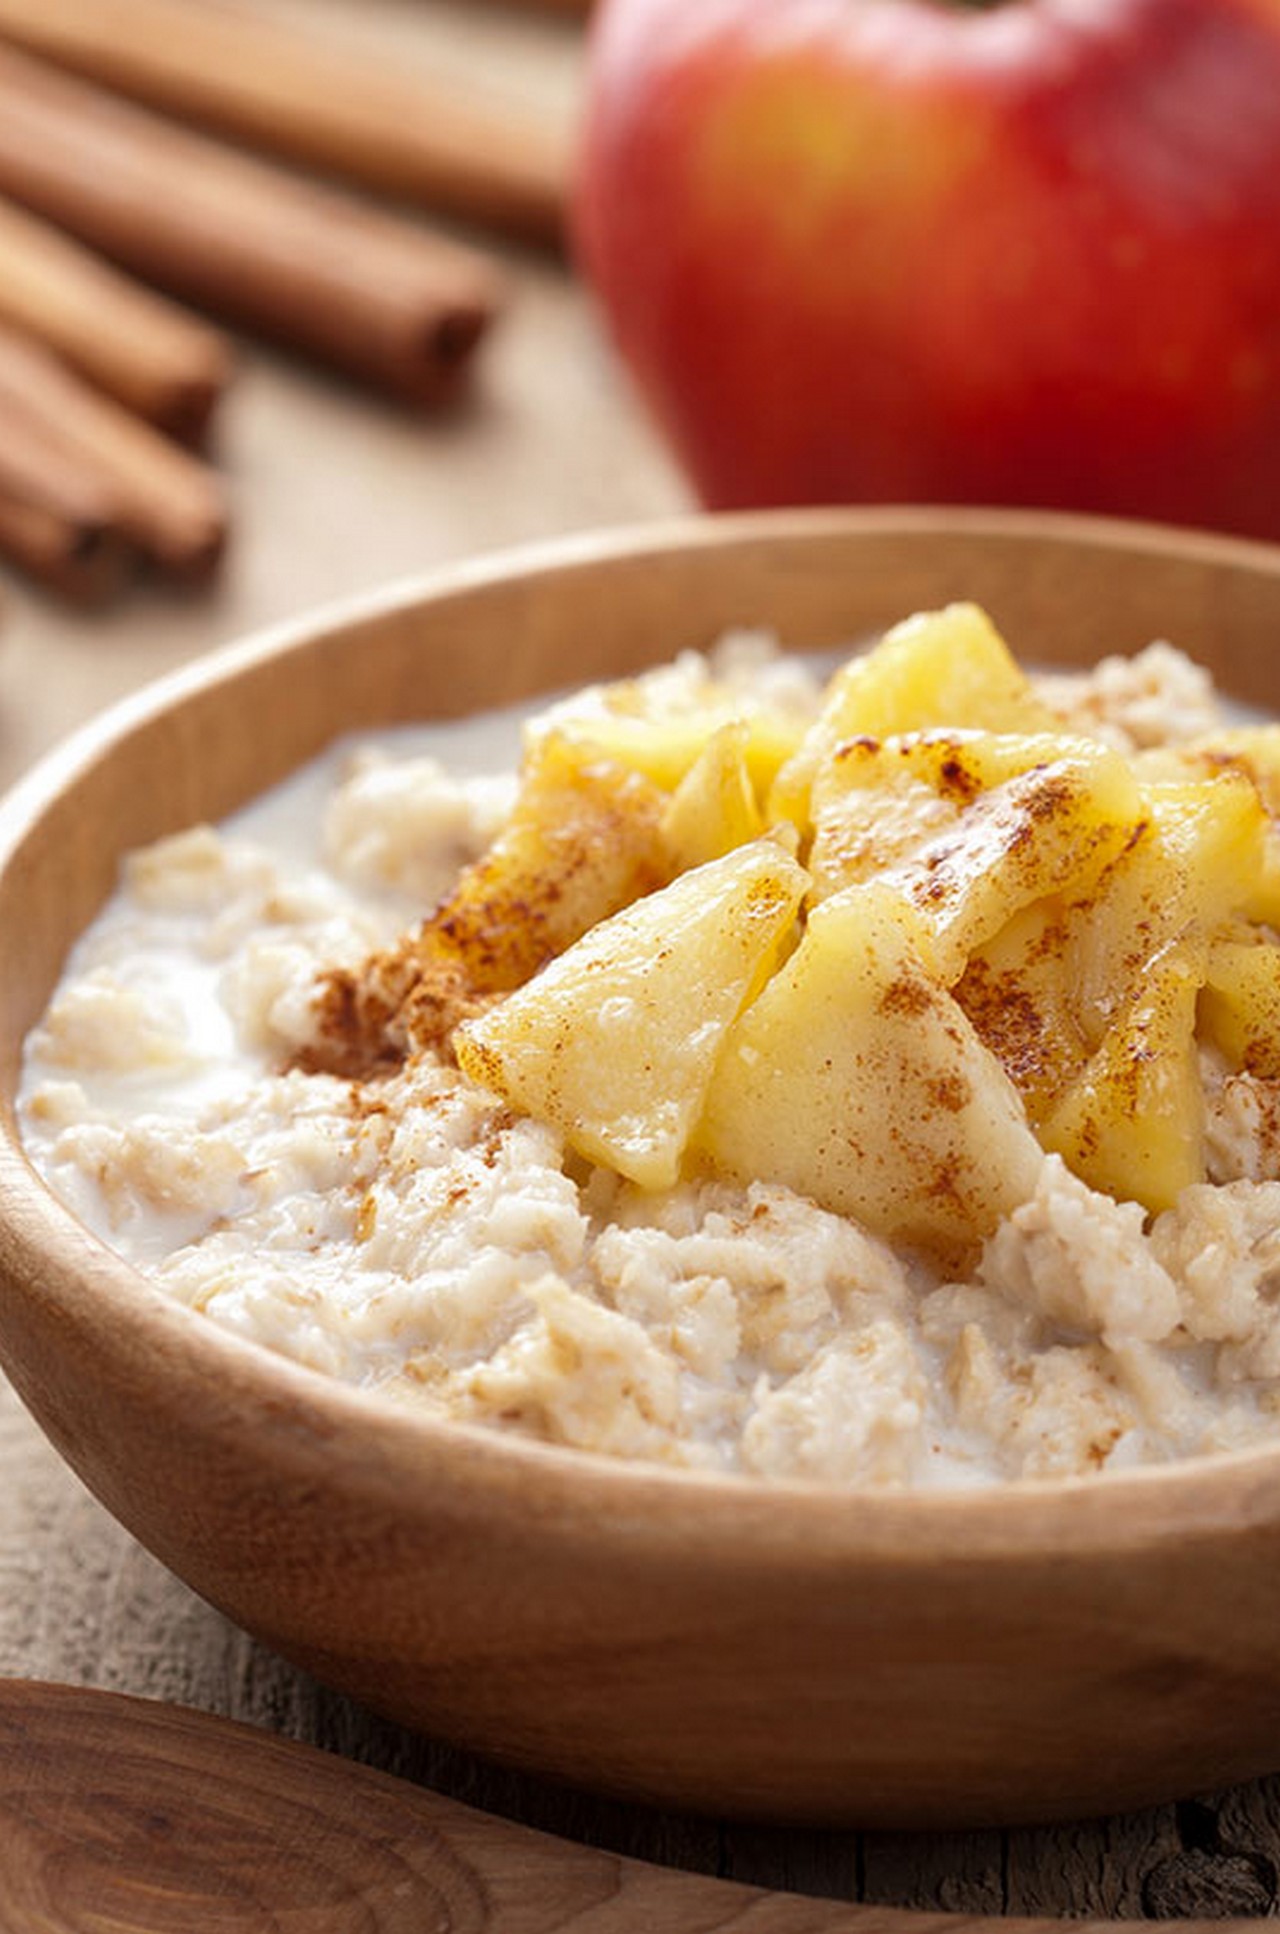  Is Oatmeal Good For Constipation?